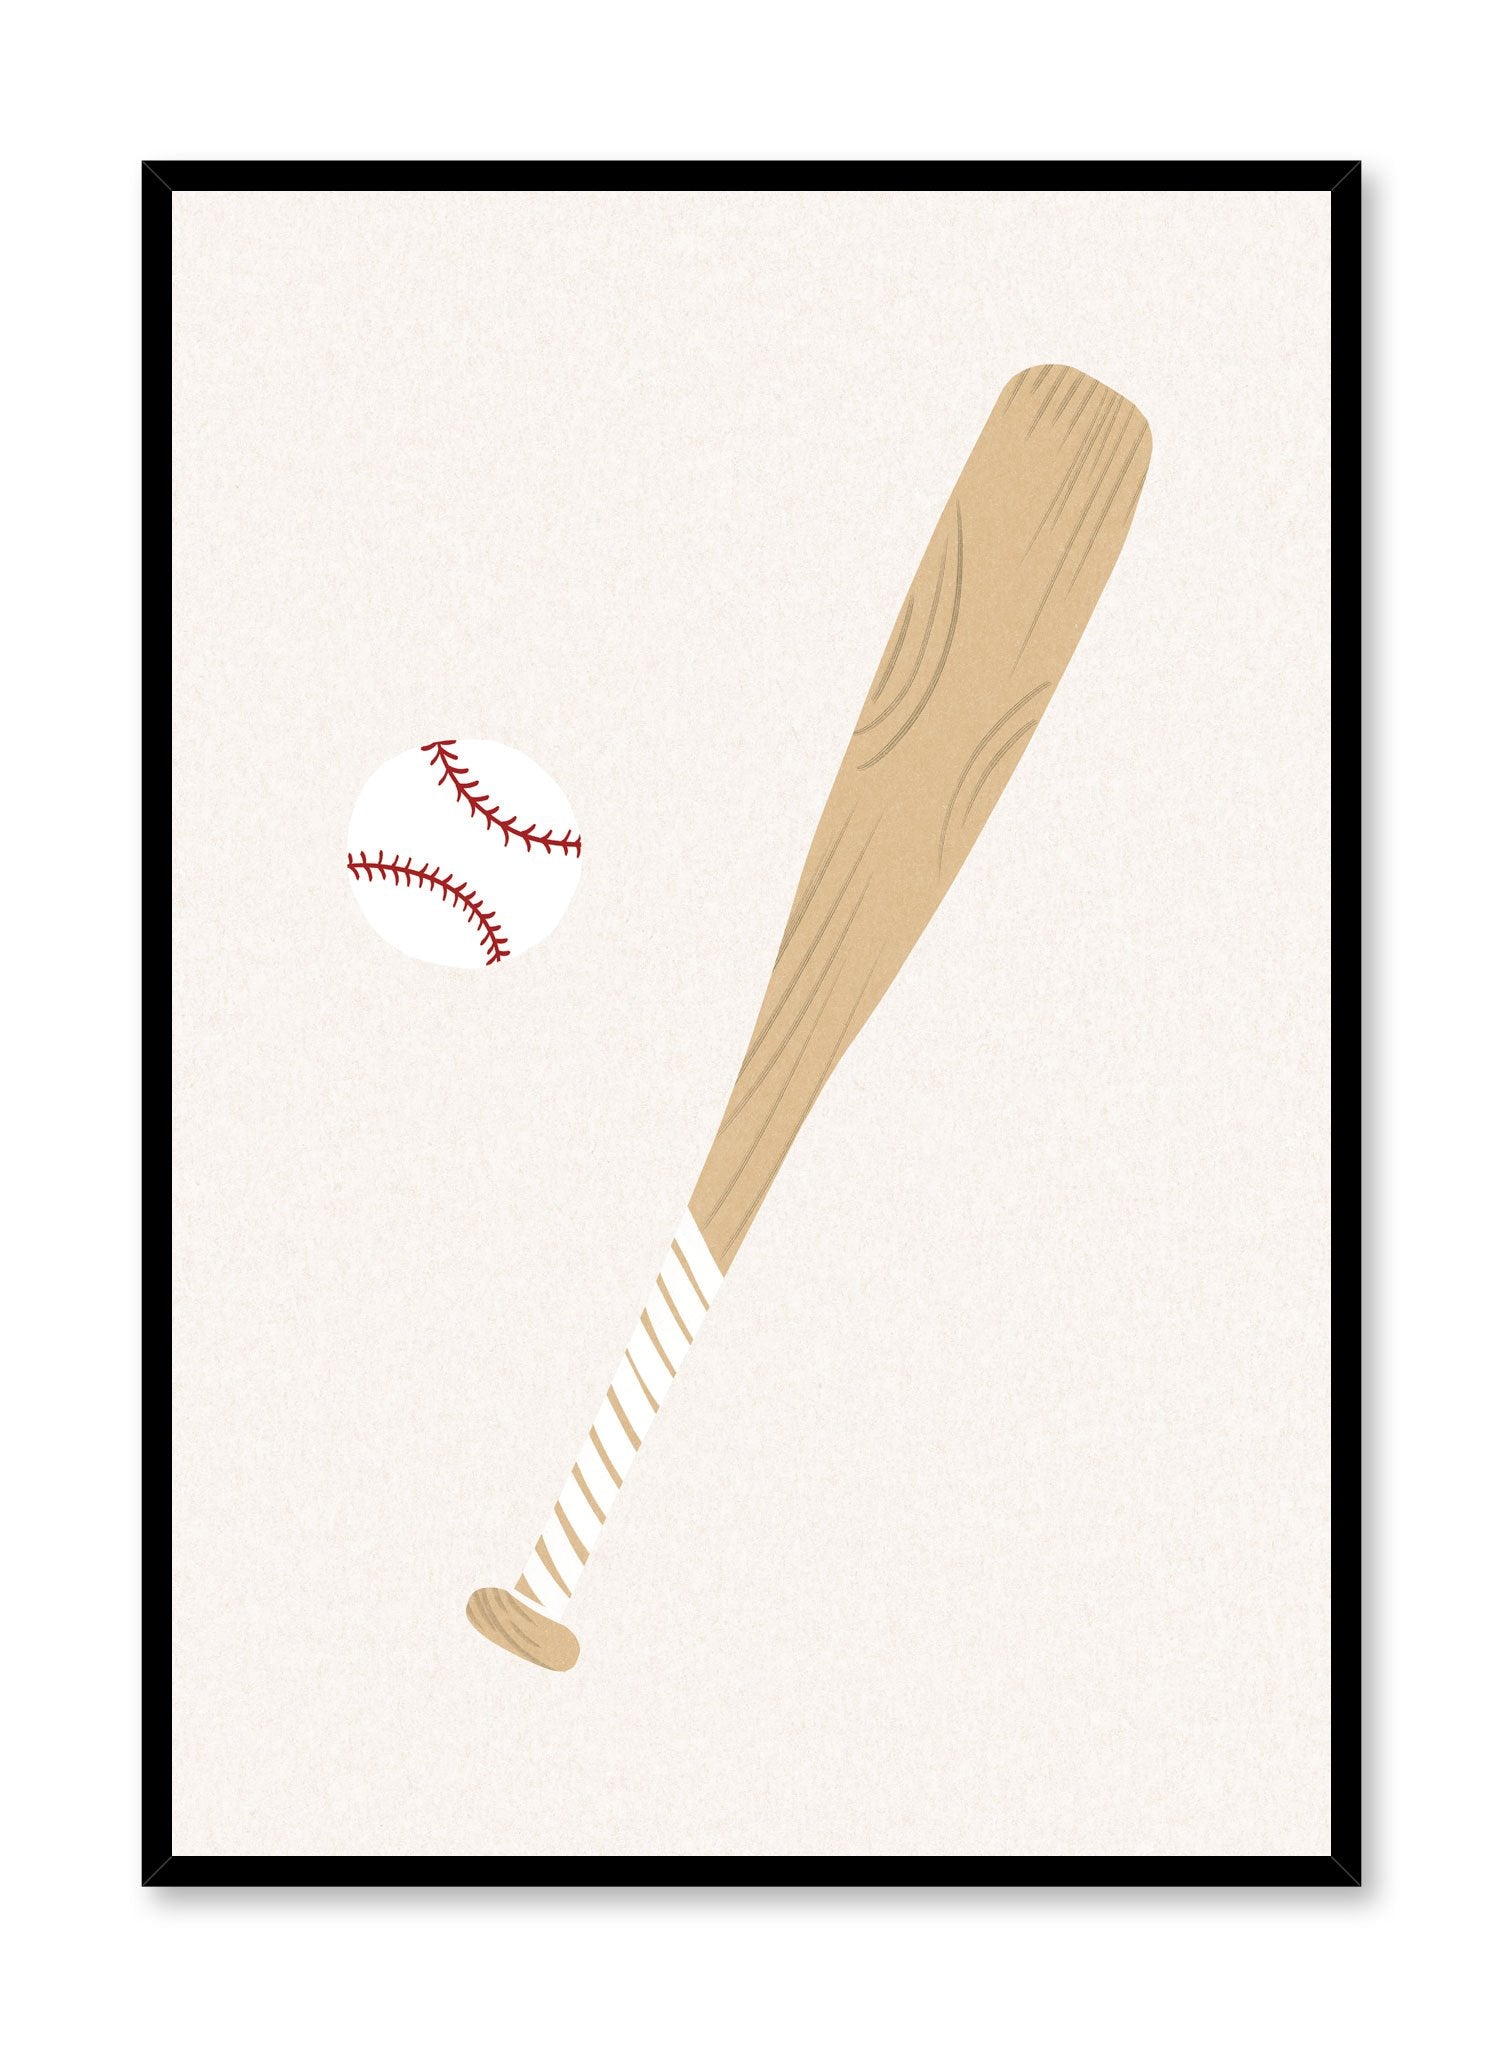 Home Run is a minimalist illustration by Opposite Wall of a baseball bat and its ball ready to hit a home run.